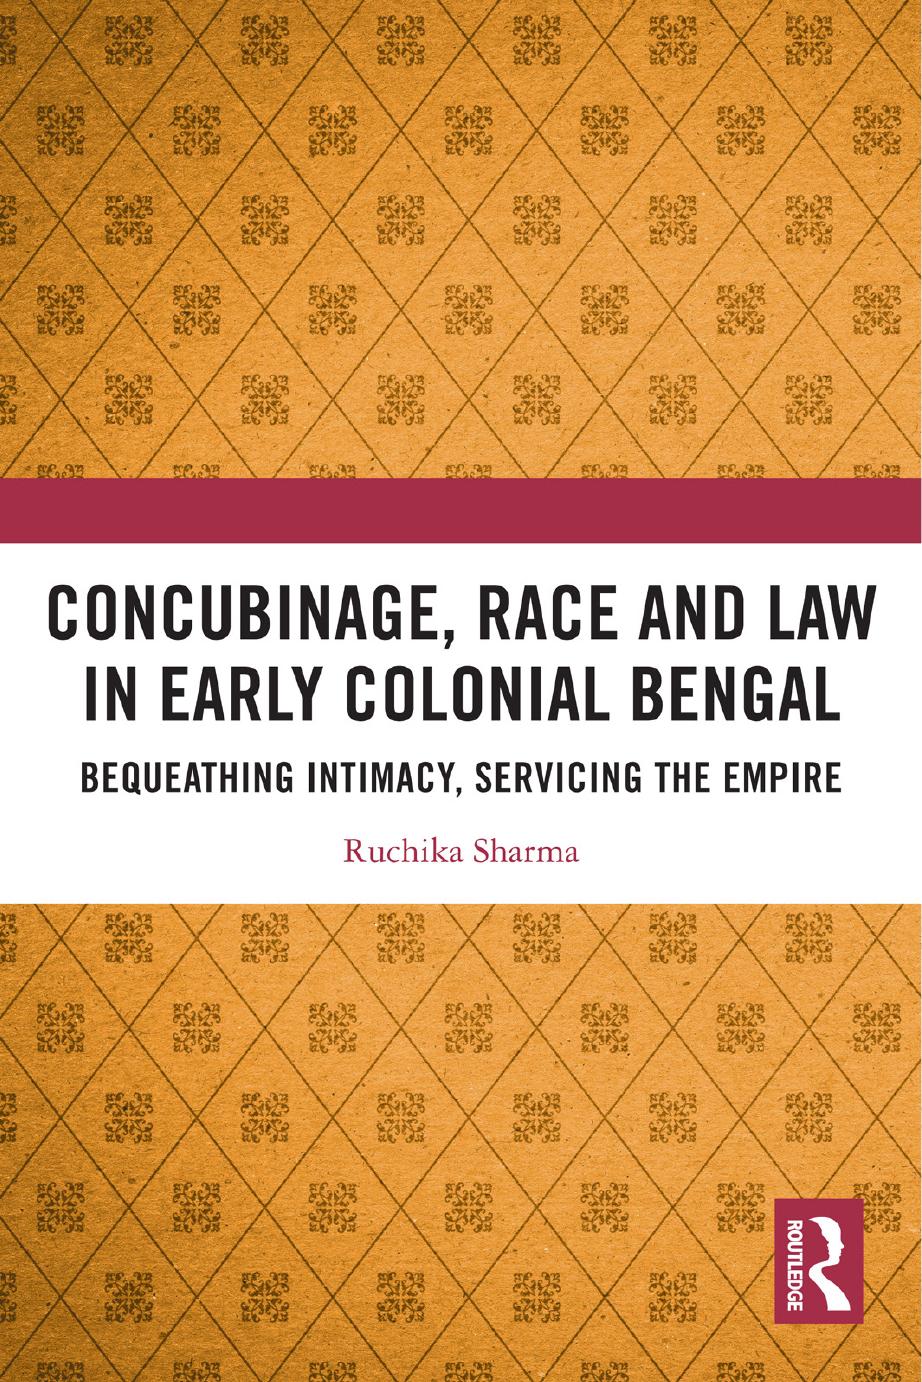 Concubinage, Race and Law in Early Colonial Bengal: Bequeathing Intimacy, Servicing the Empire by Ruchika Sharma